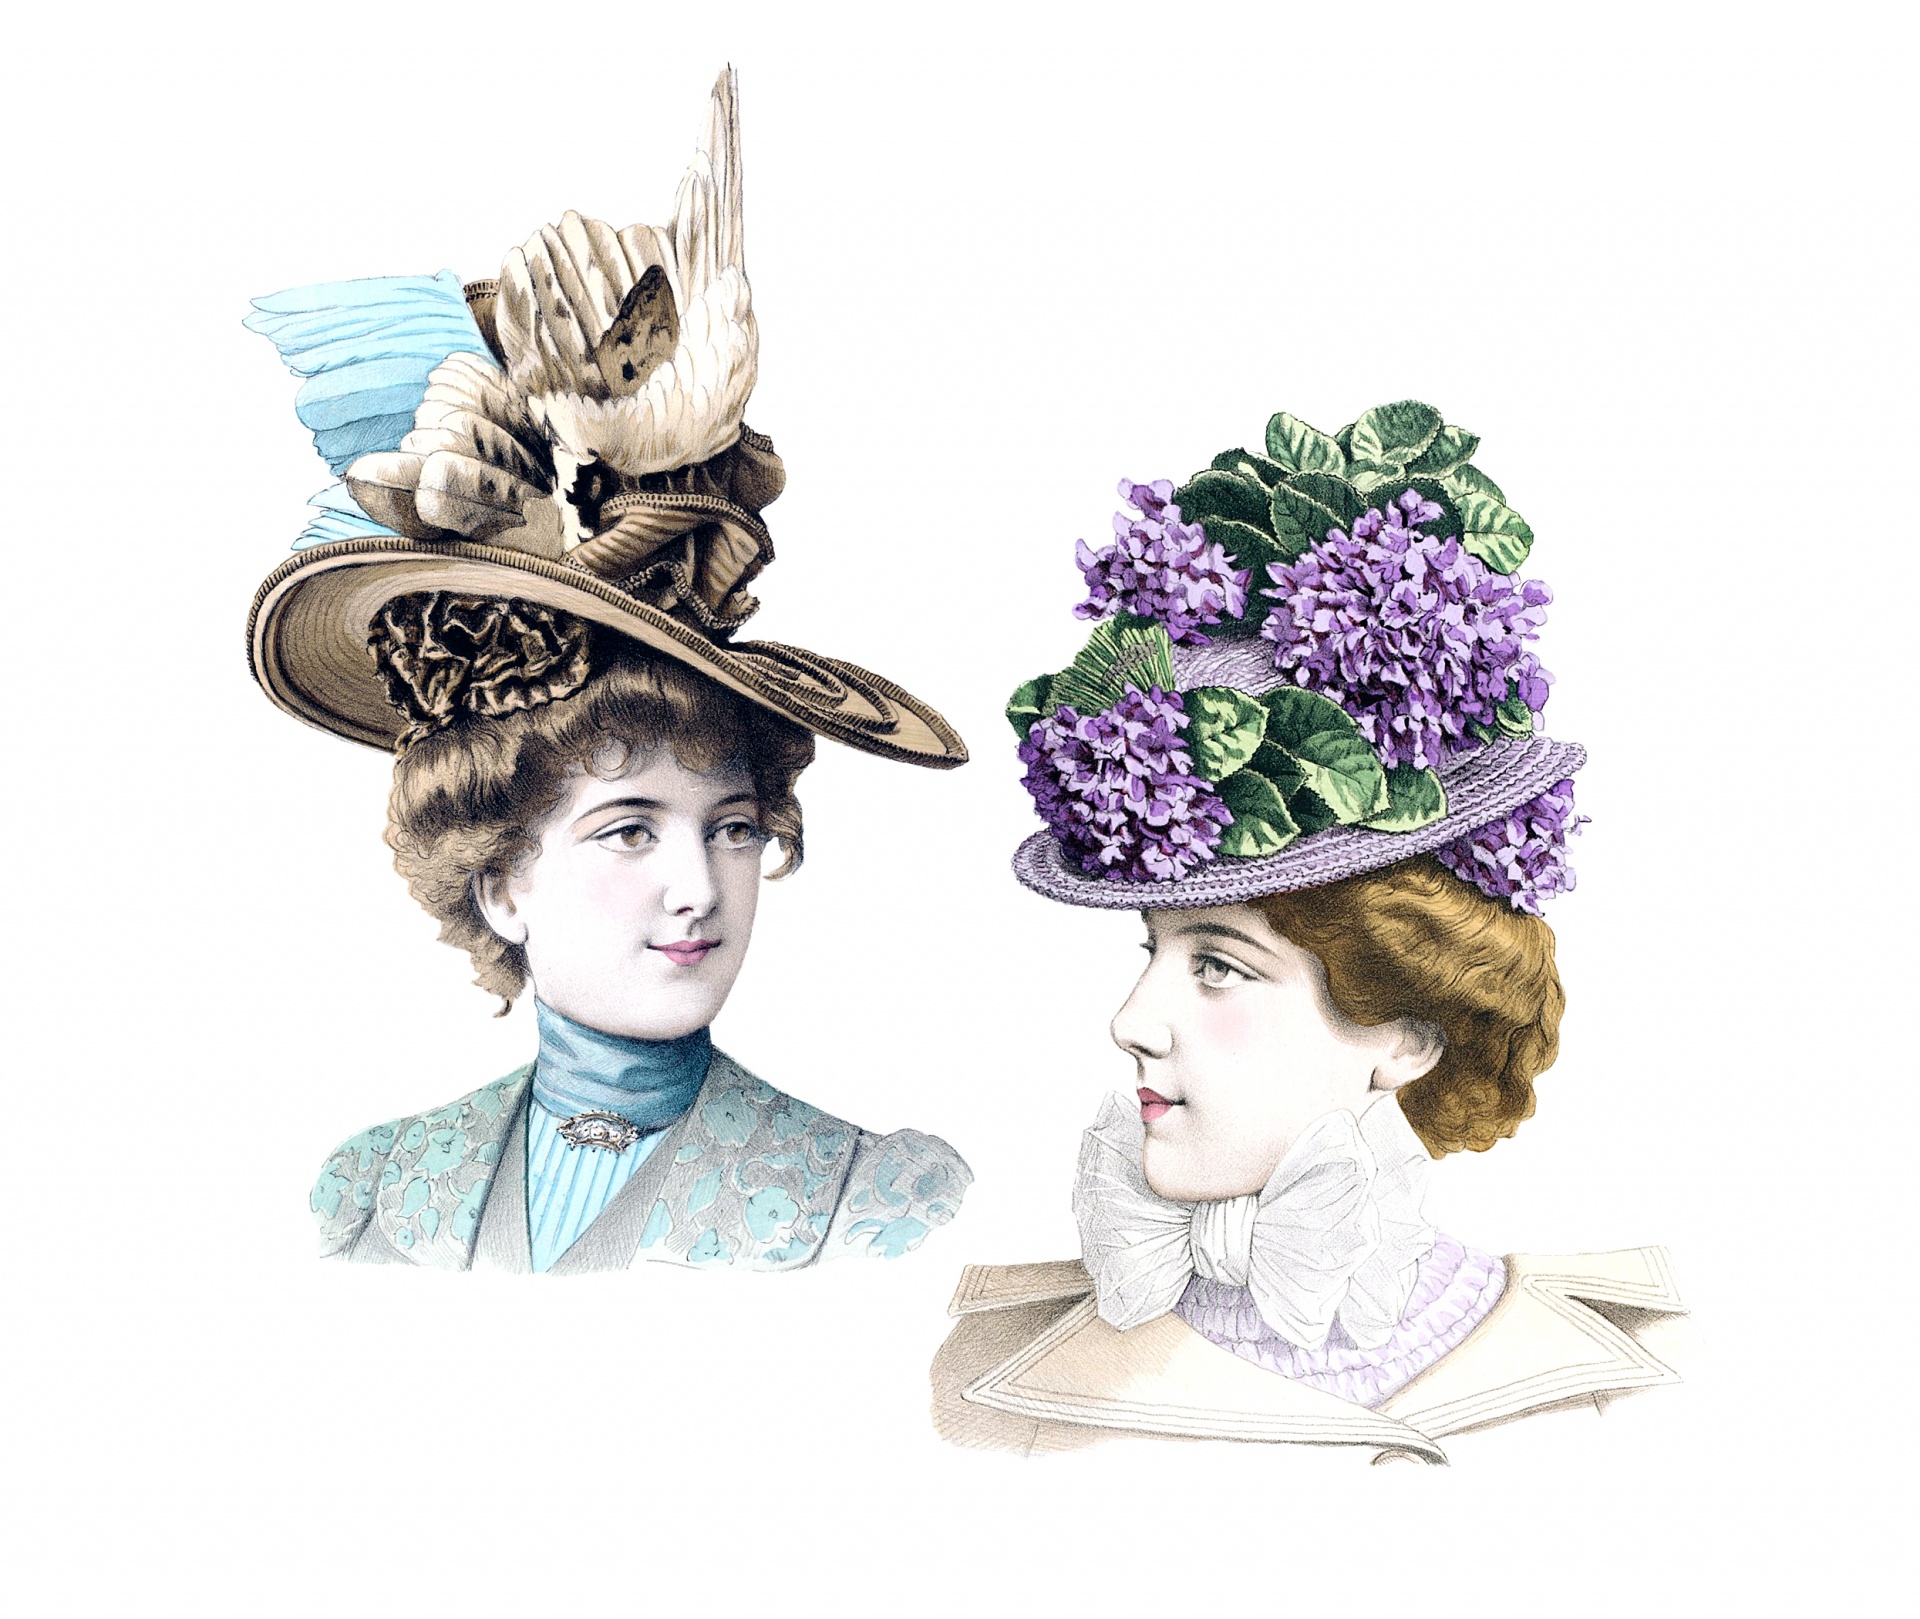 Colorful vintage drawing of two lady's in fancy hats